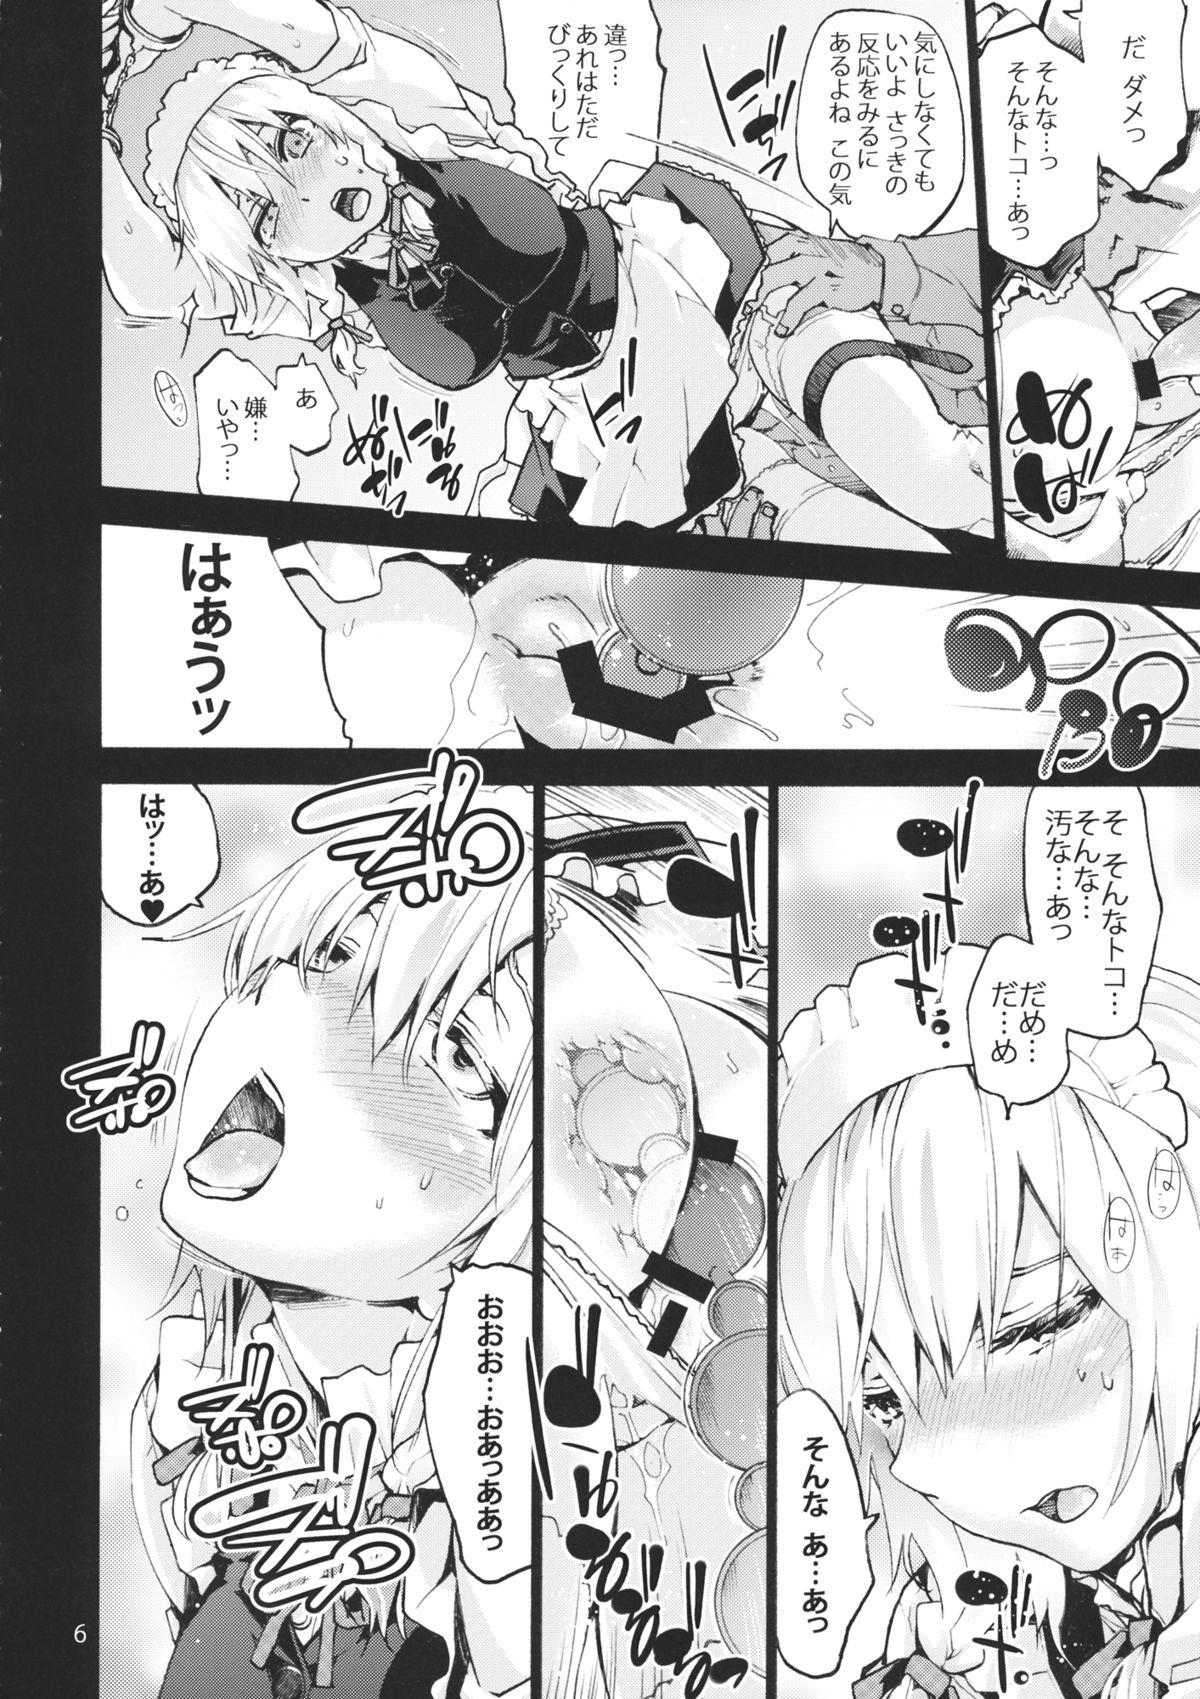 Oiled undressing, discharging - Touhou project Full Movie - Page 7